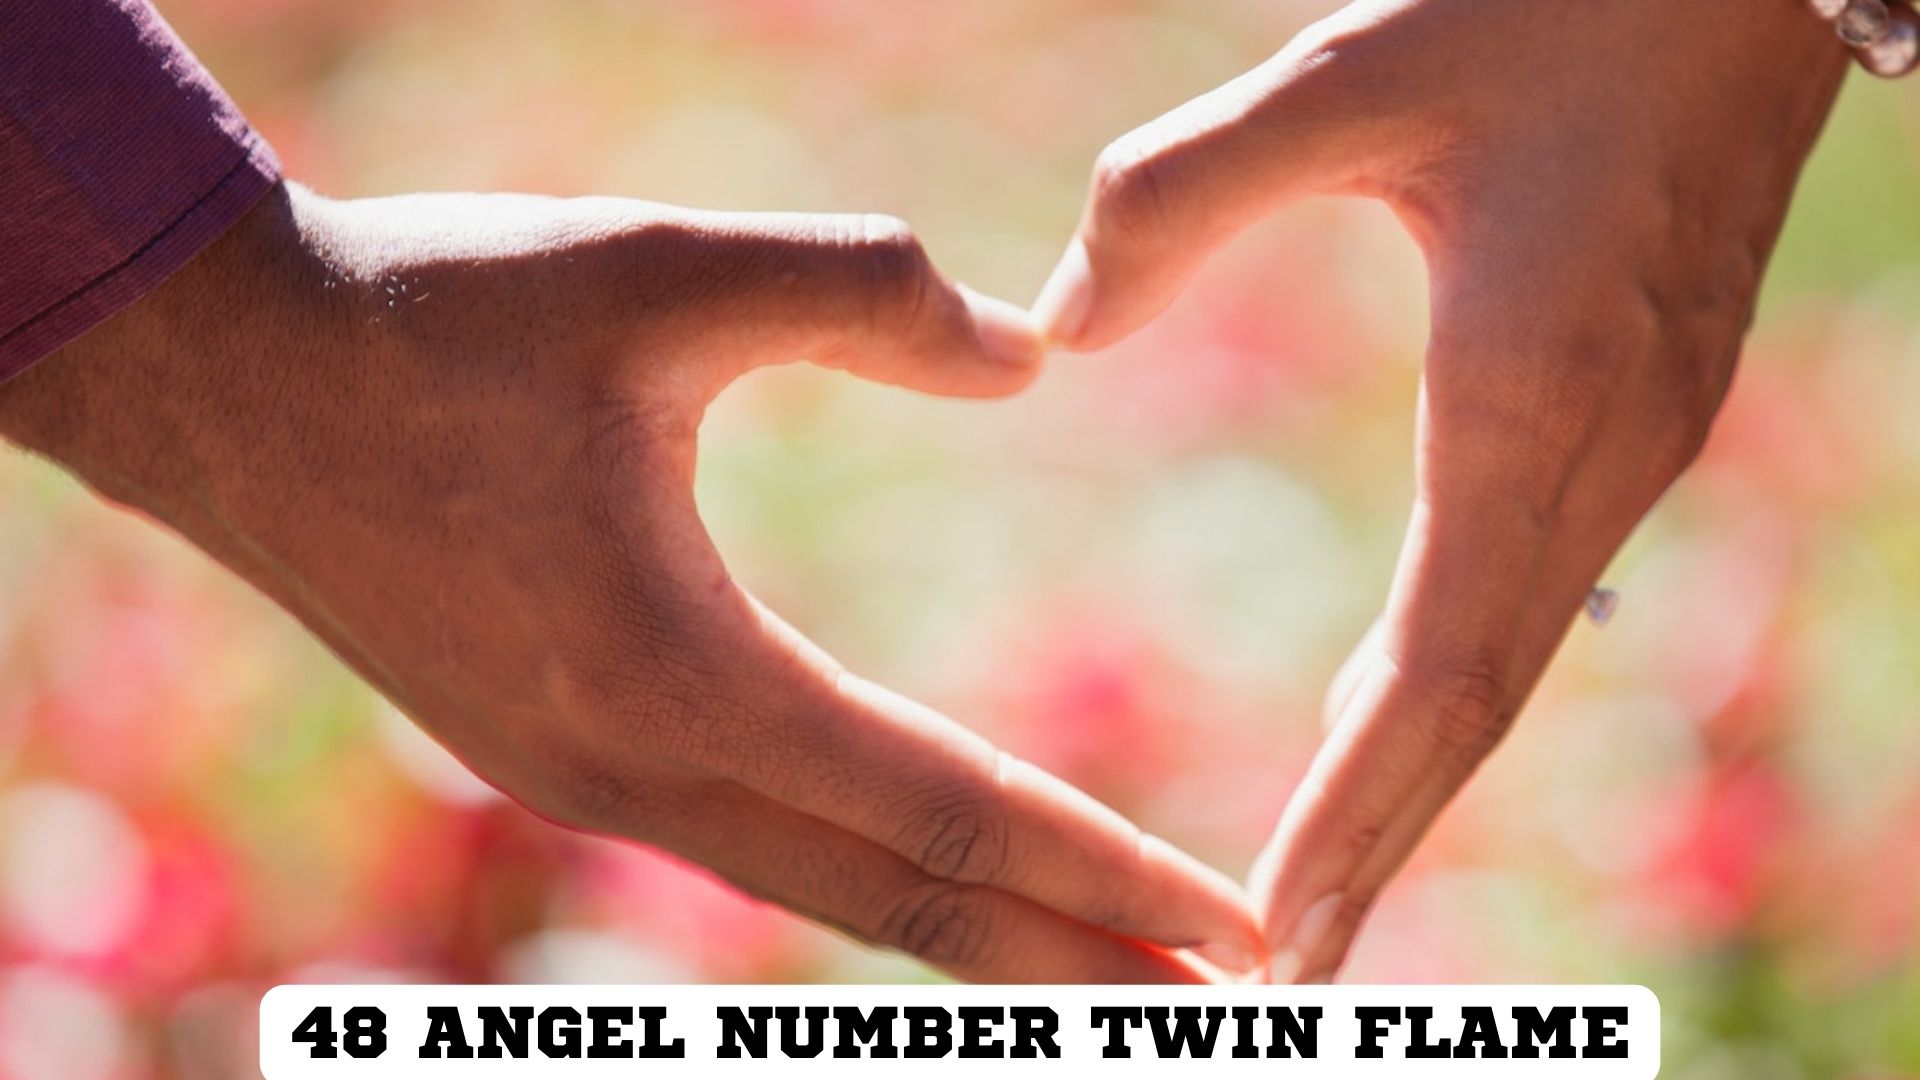 48 Angel Number Twin Flame - Believe In Perfect Timing